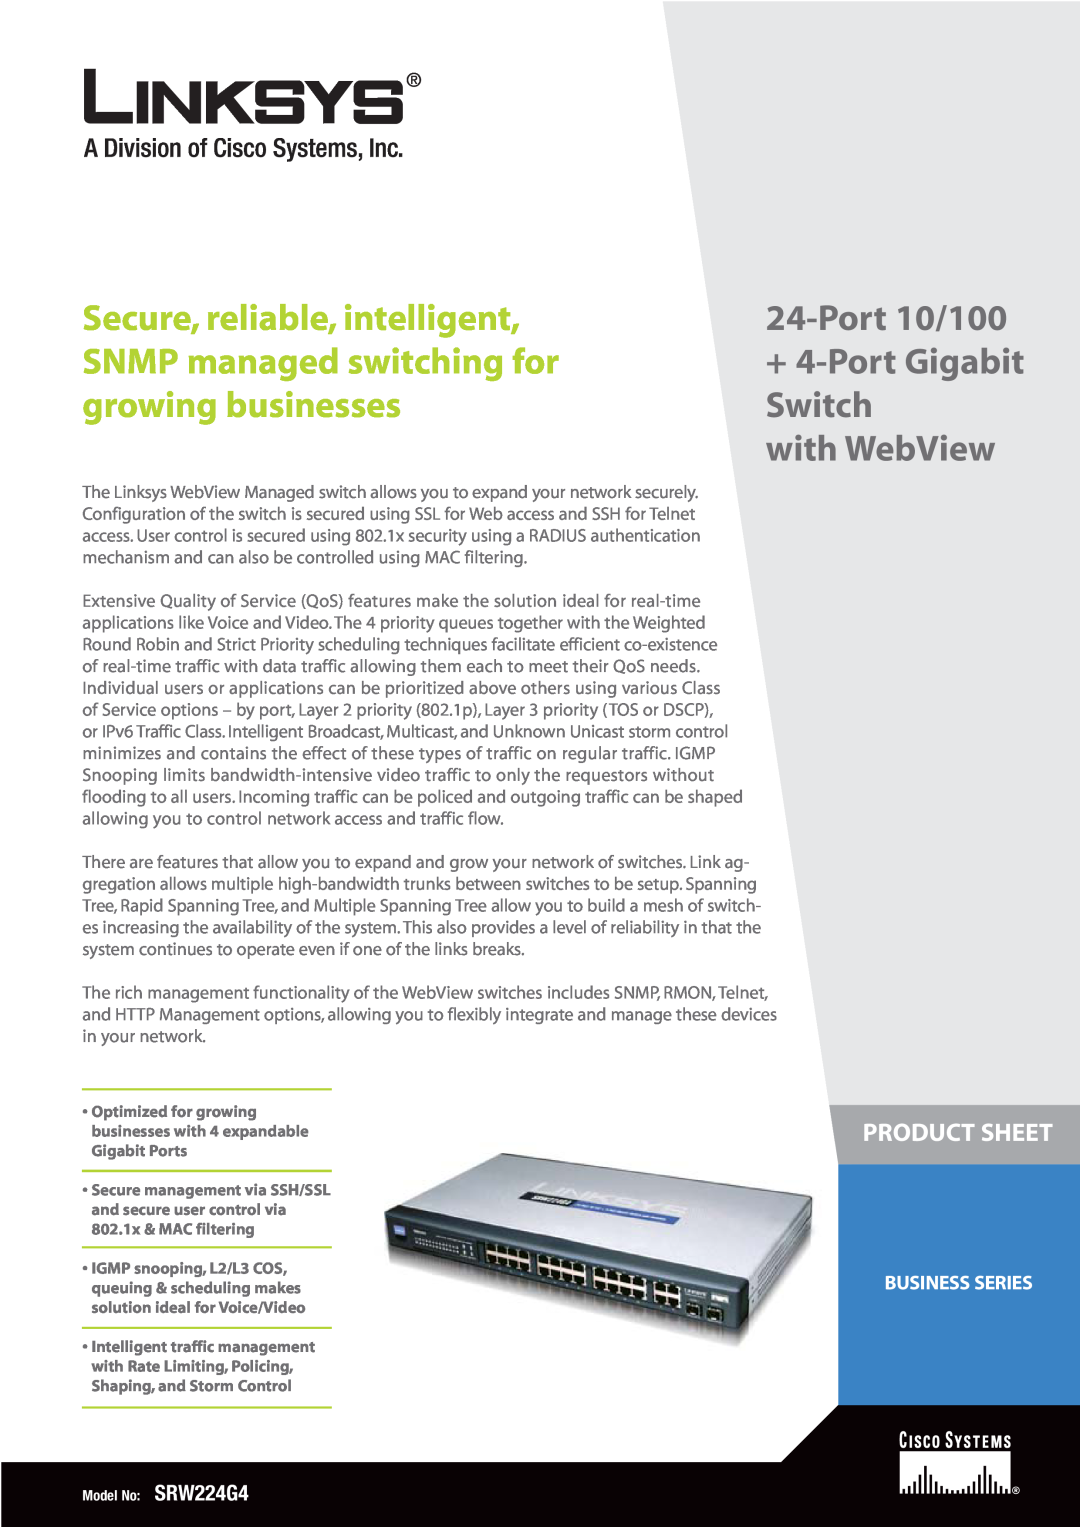 Cisco Systems SRW224G4 manual Business Series, Secure, reliable, intelligent, Port 10/100, SNMP managed switching for 